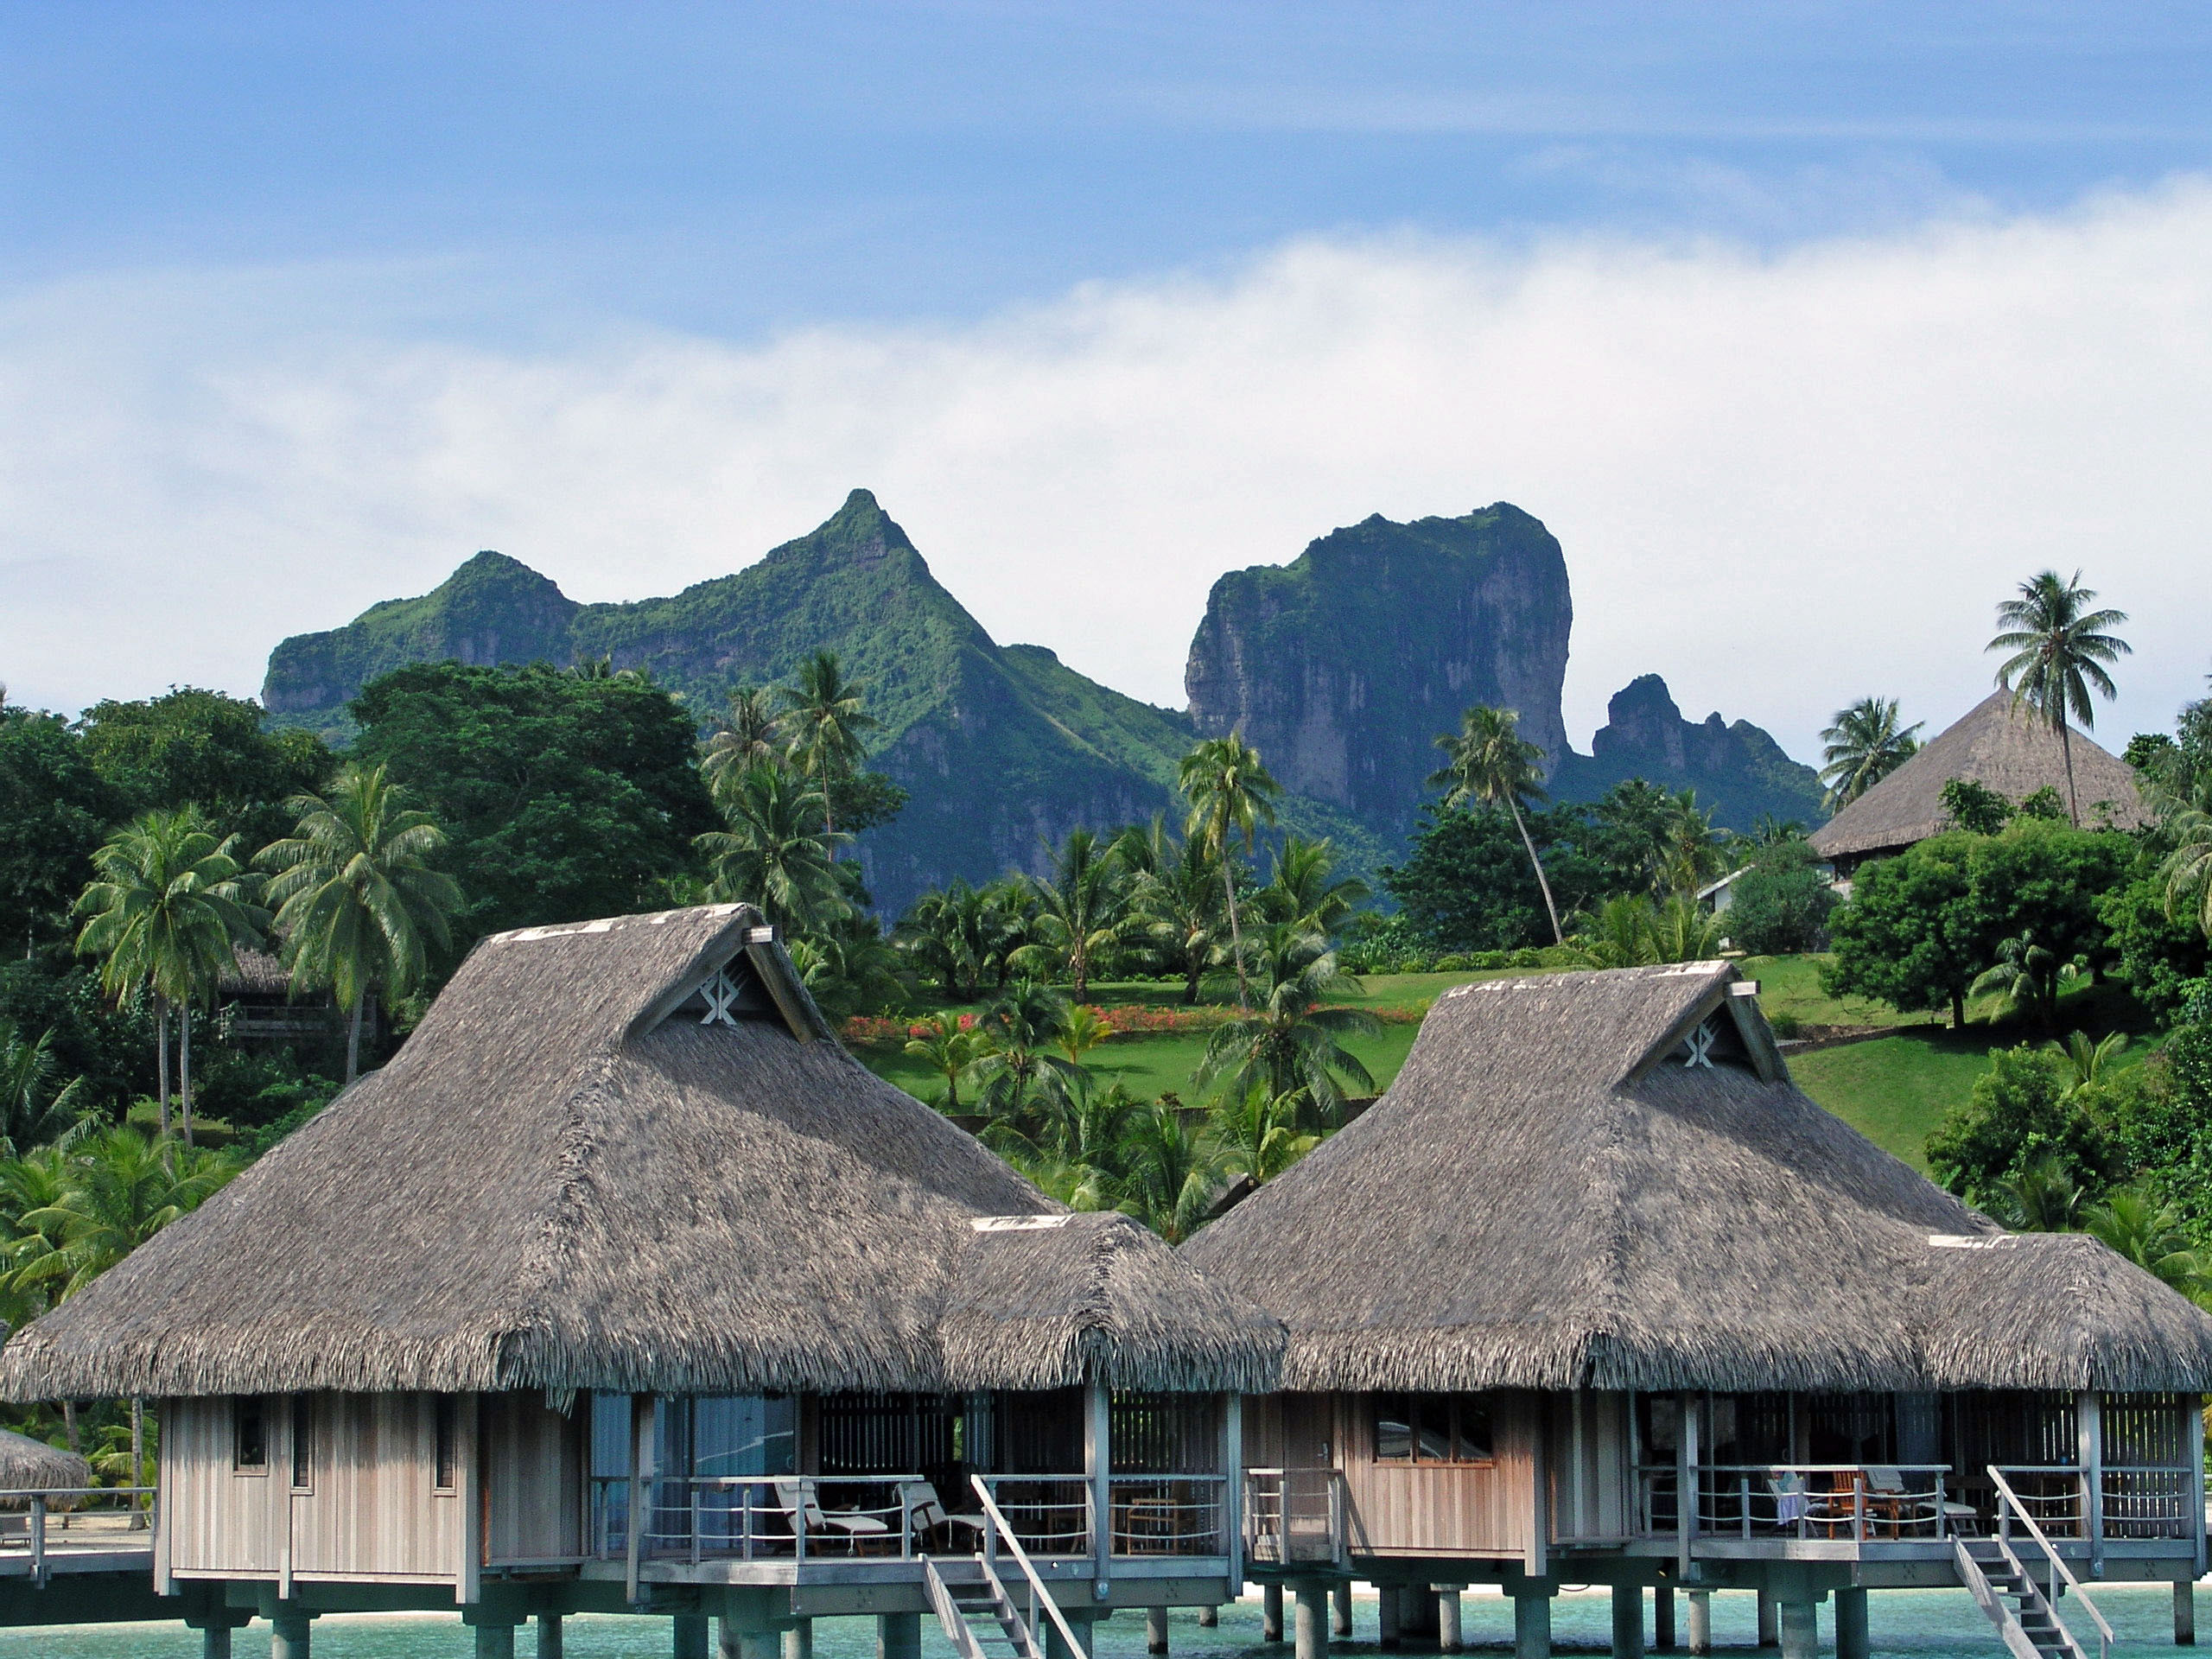 View from our overwater bungalow at the Bora Bora Nui